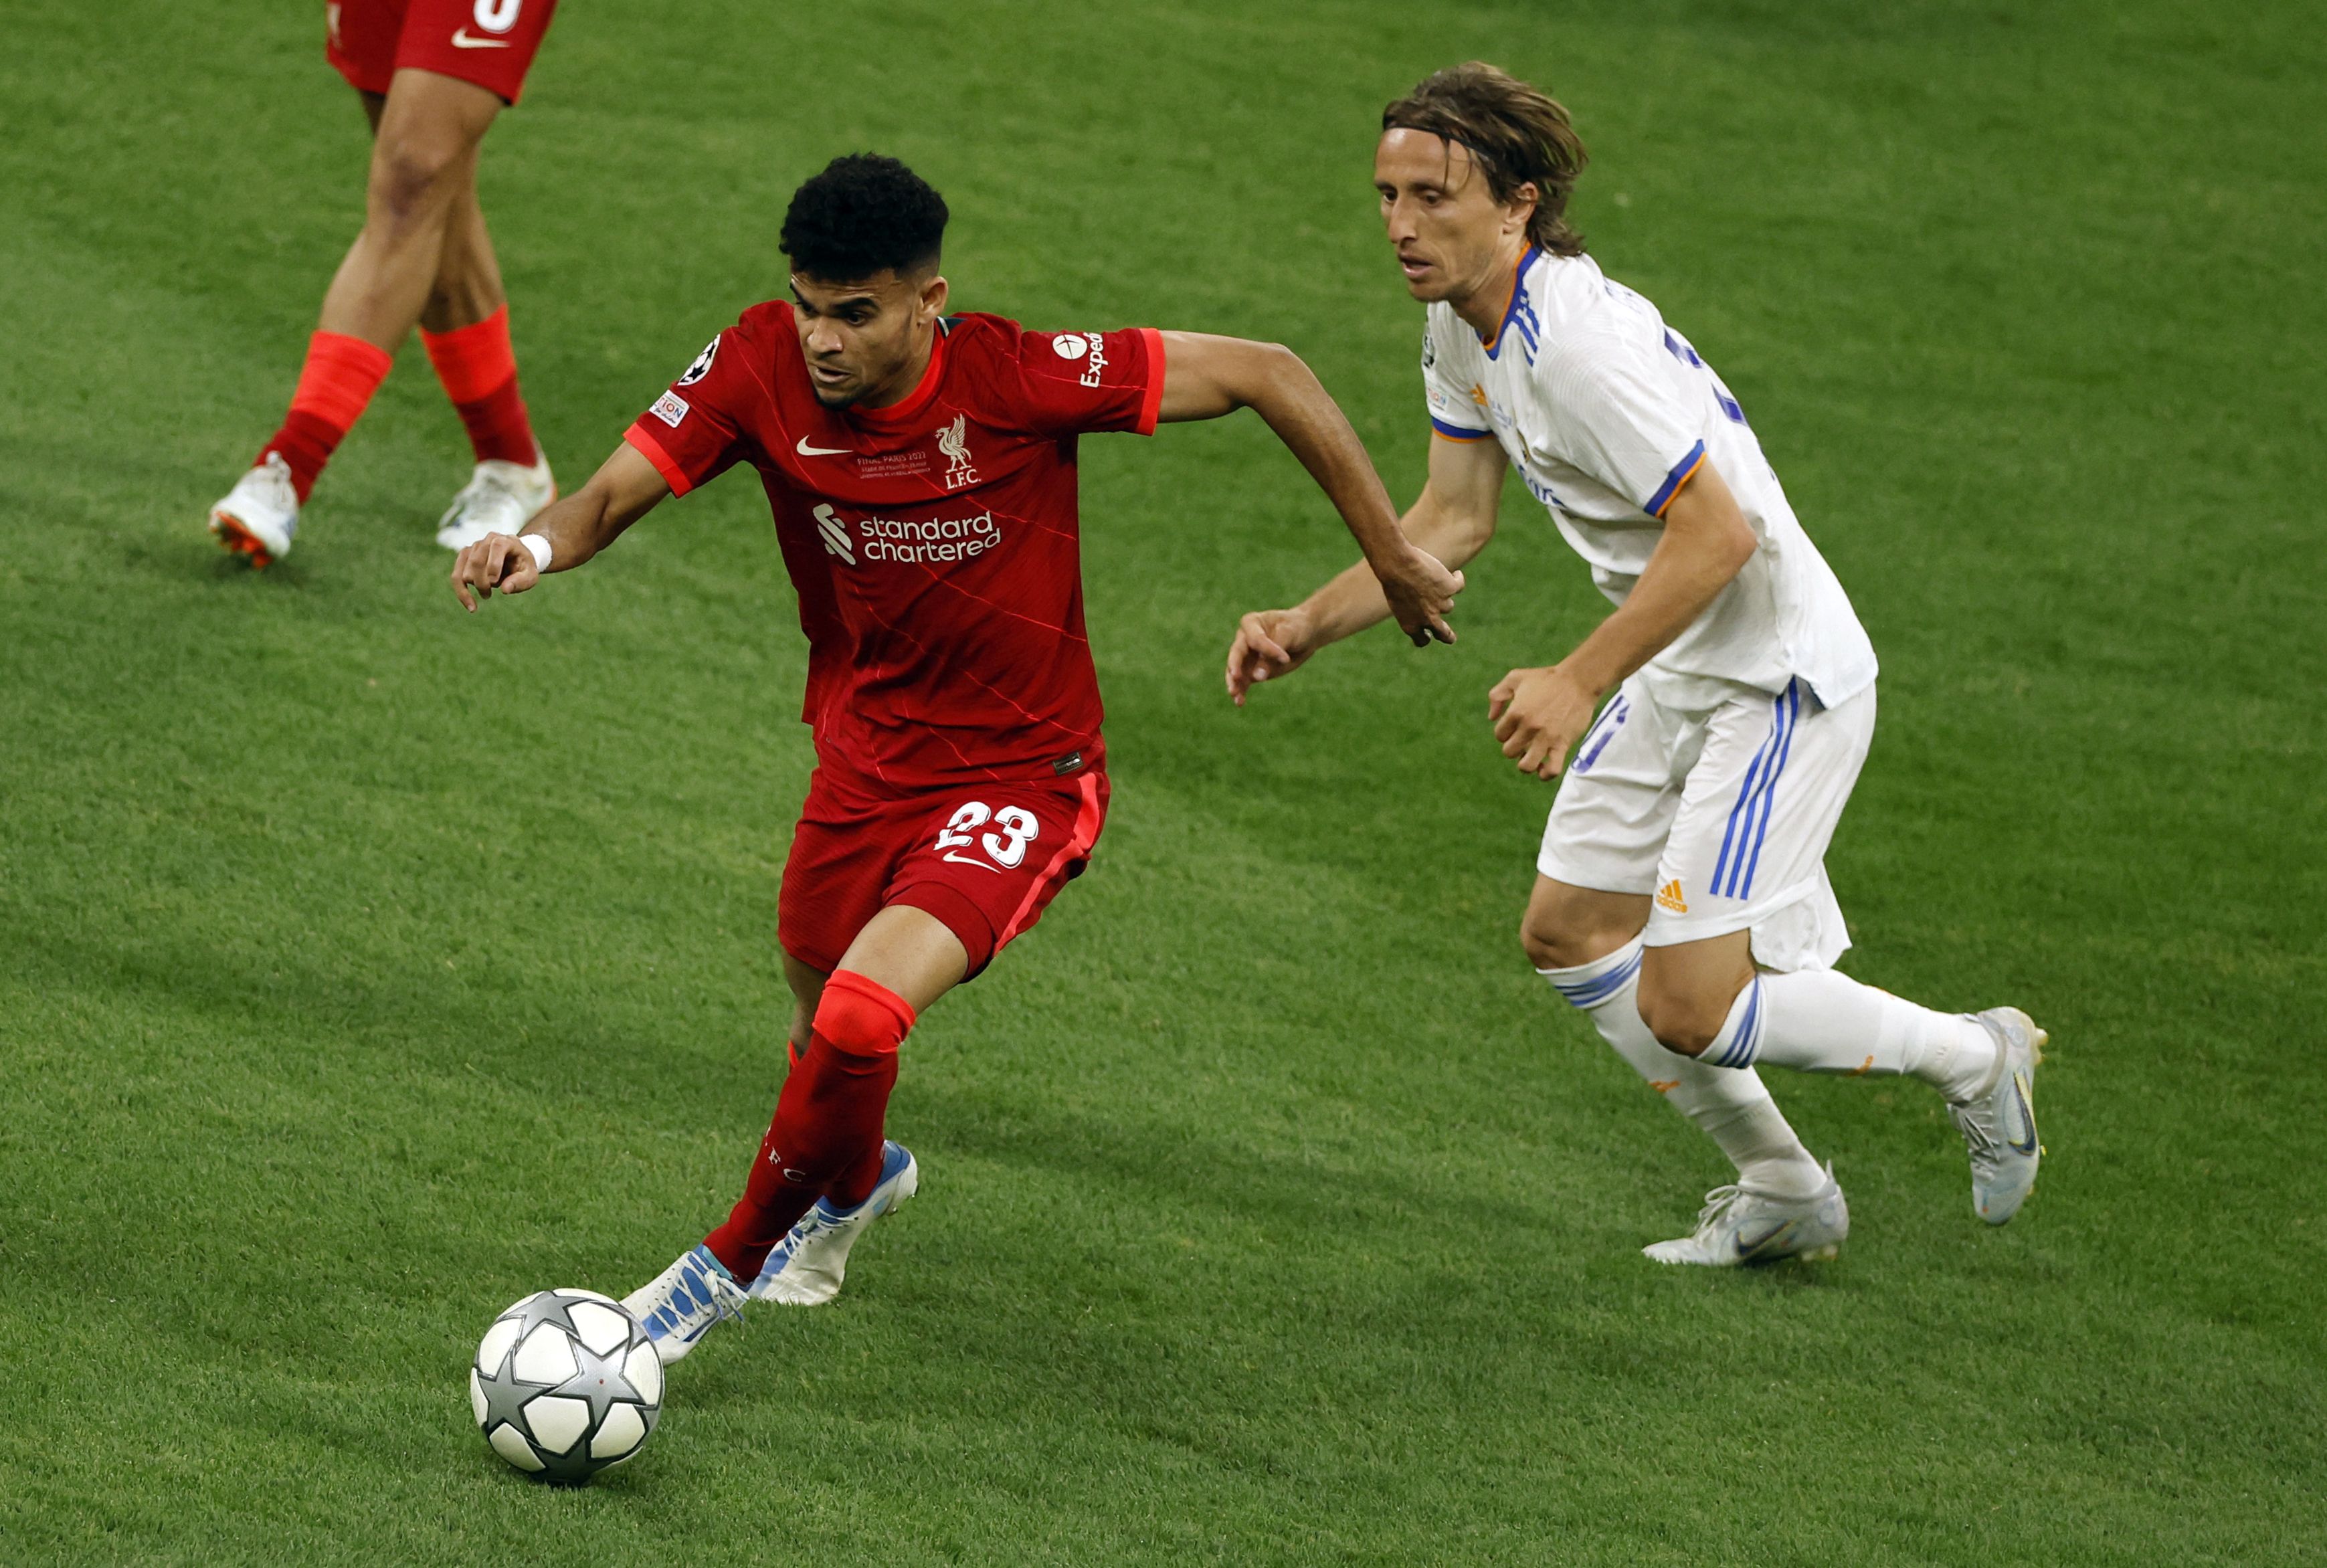 Soccer Football - Champions League Final - Liverpool v Real Madrid - Stade de France, Saint-Denis near Paris, France - May 28, 2022 Liverpool's Luis Diaz in action with Real Madrid's Luka Modric REUTERS/Gonzalo Fuentes